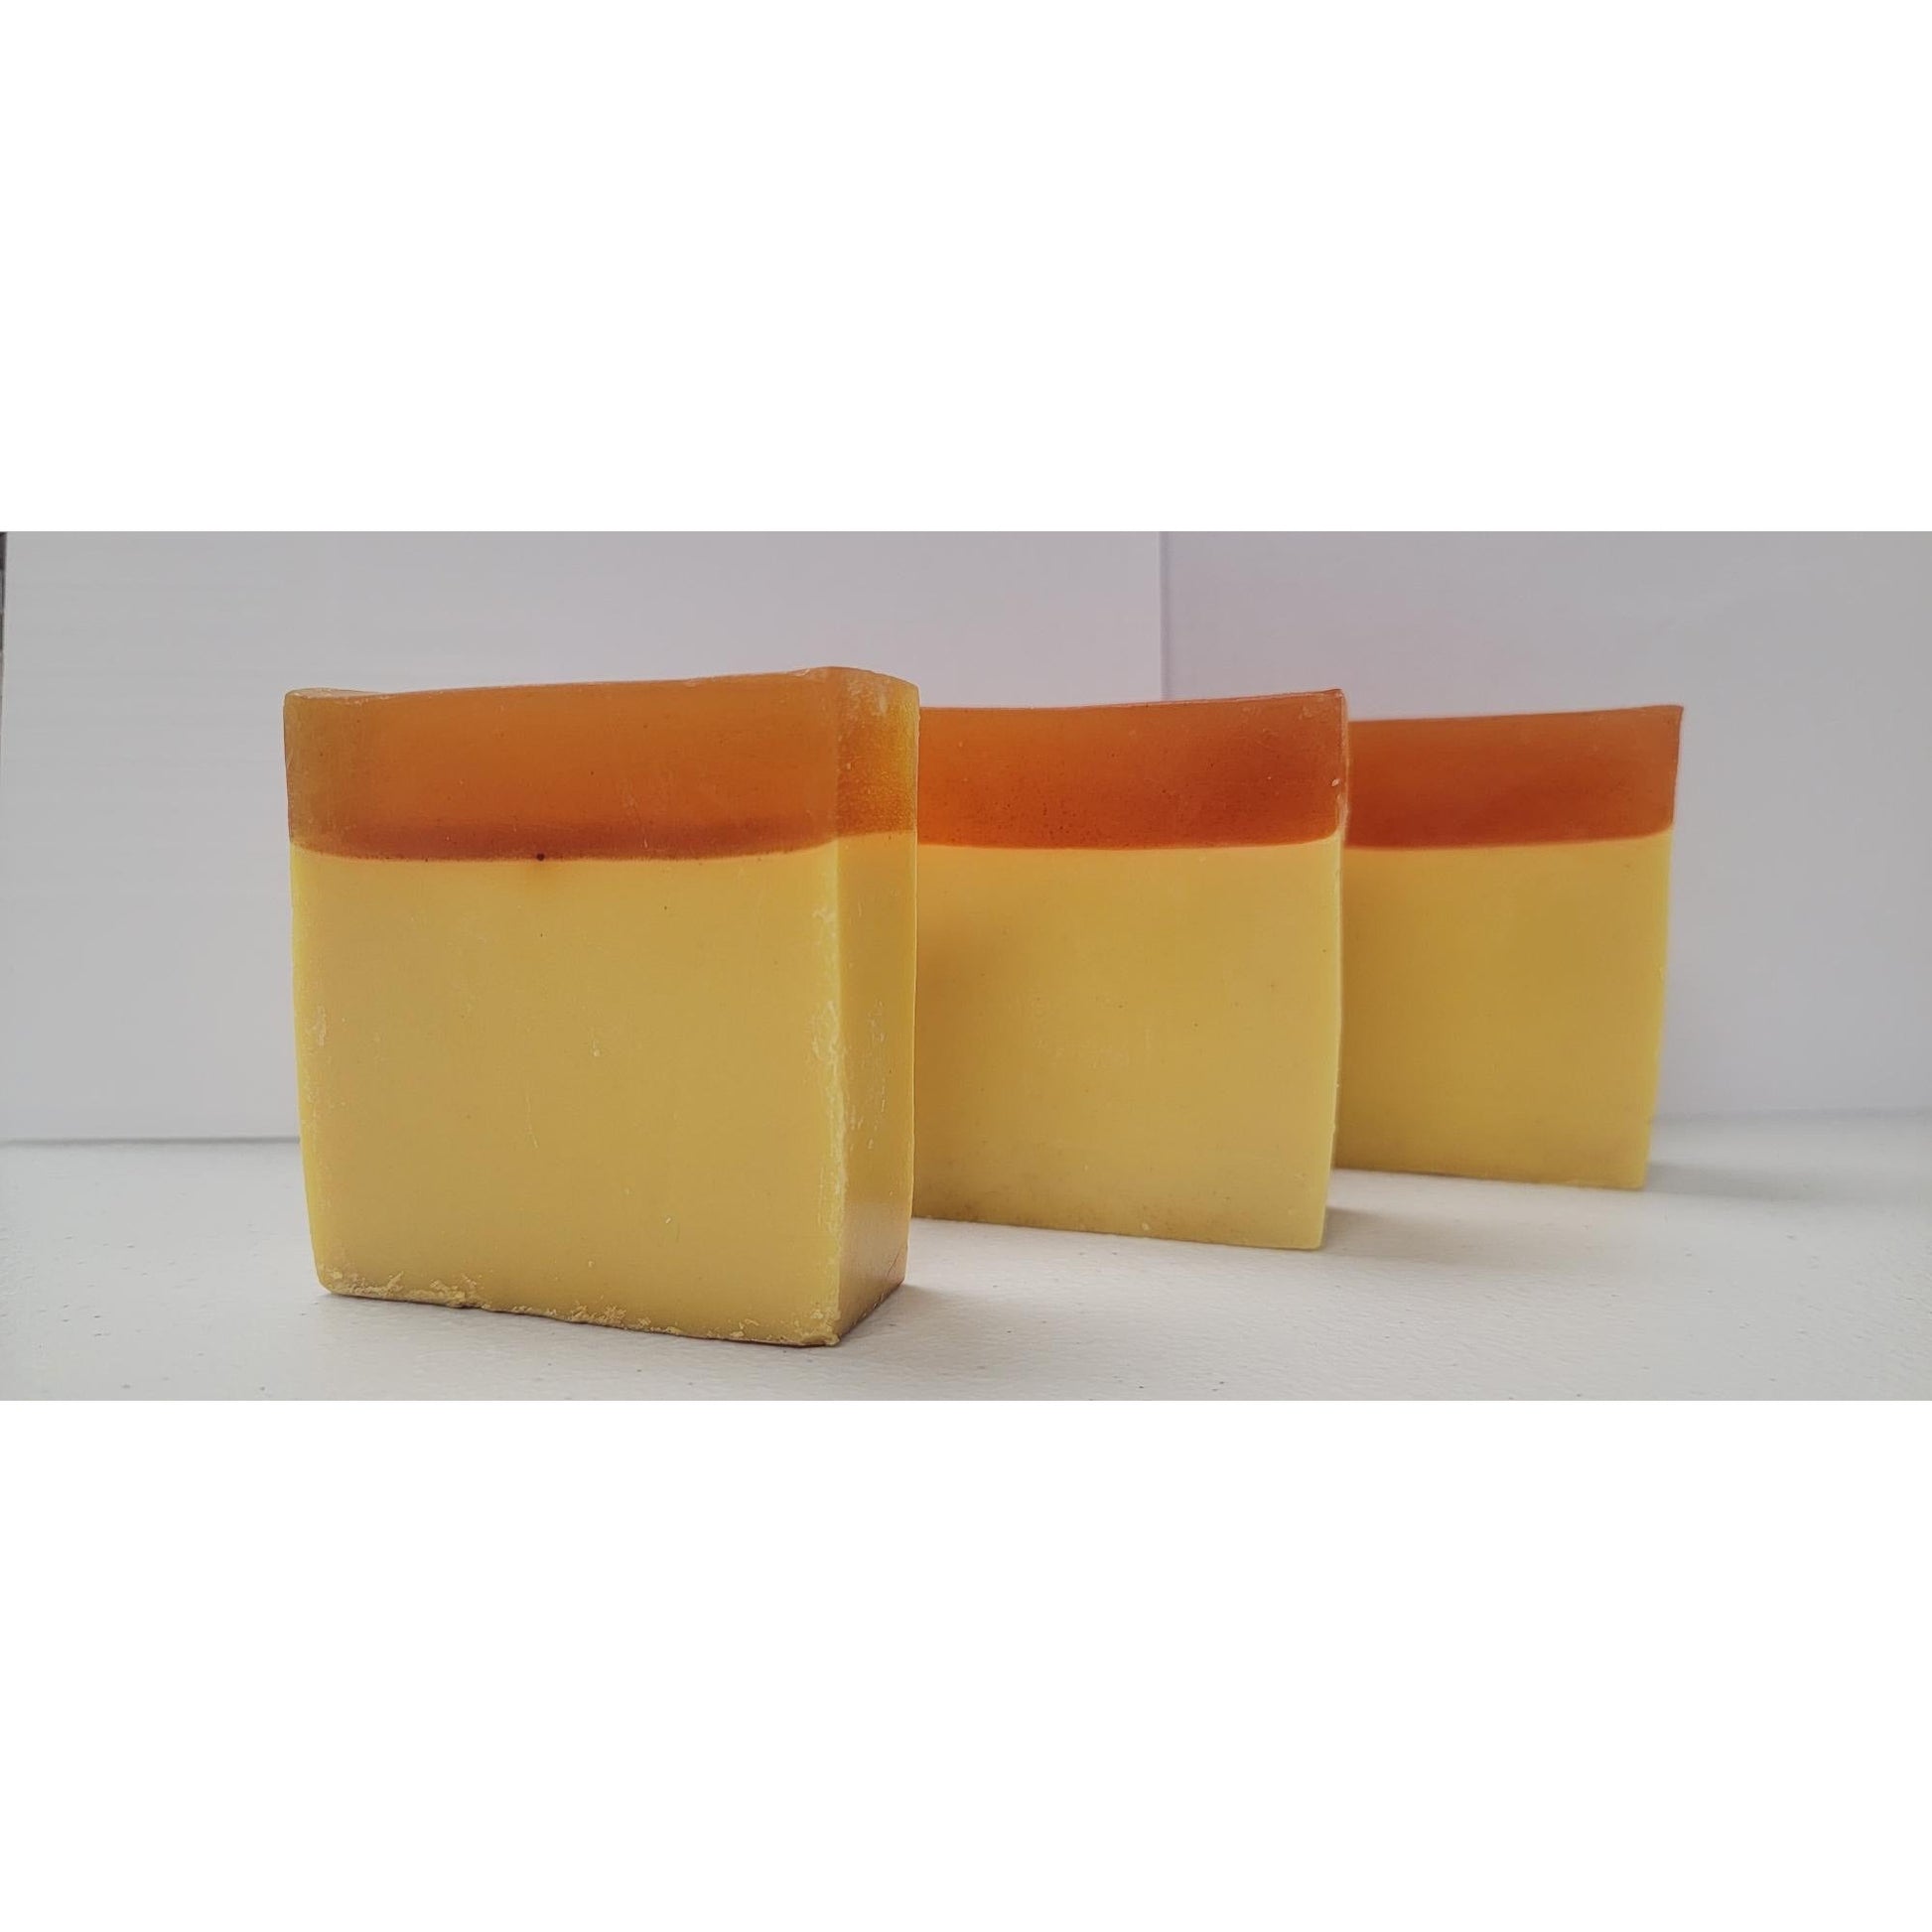 Wholesale make a glycerin soap base For Skin That Smells Great And